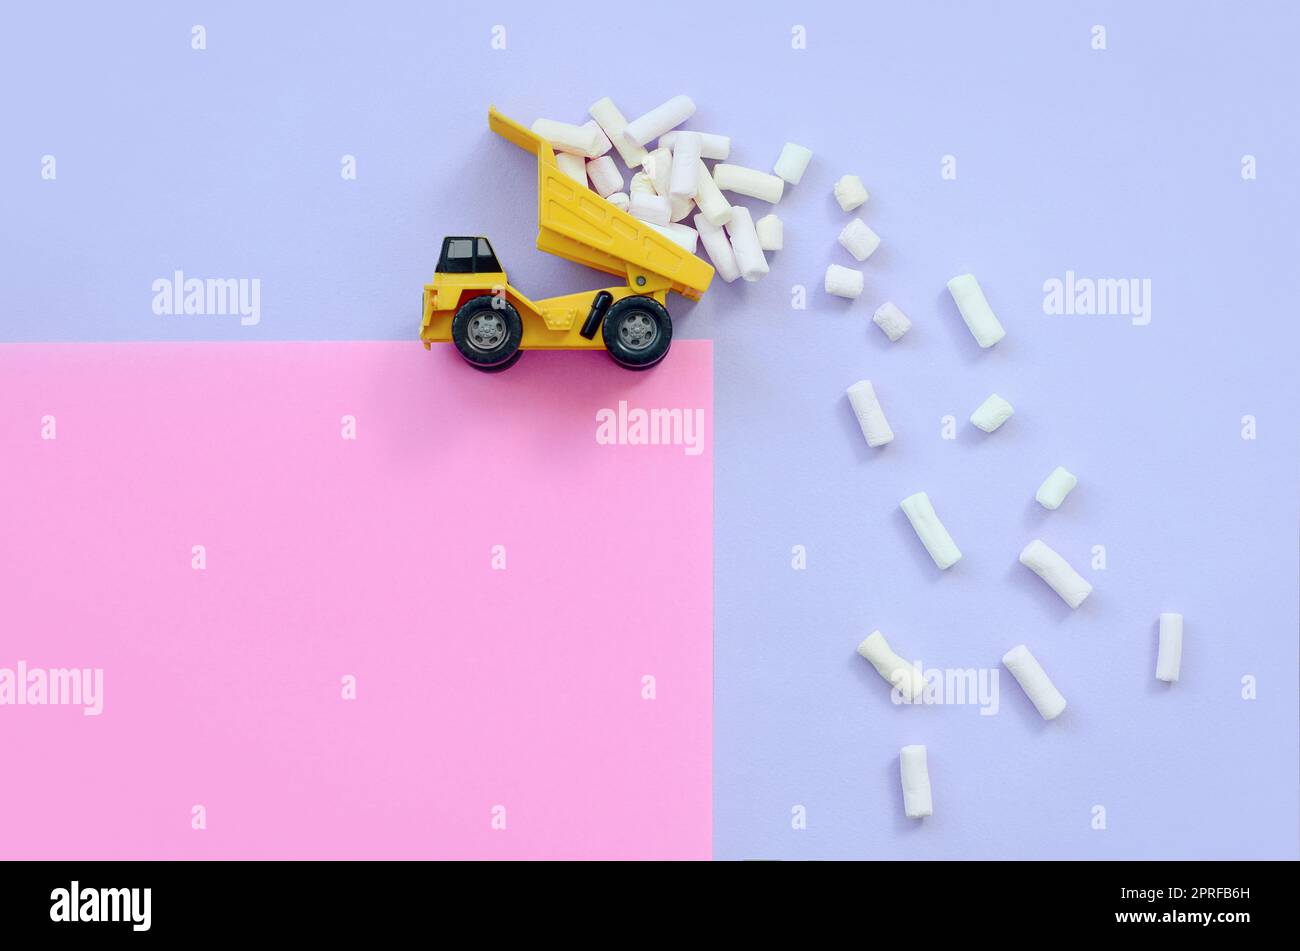 Yellow little toy dump truck throws marshmallow pieces from its raised back on a pastel violet and pink background. Flat lay minimal top view. Stock Photo